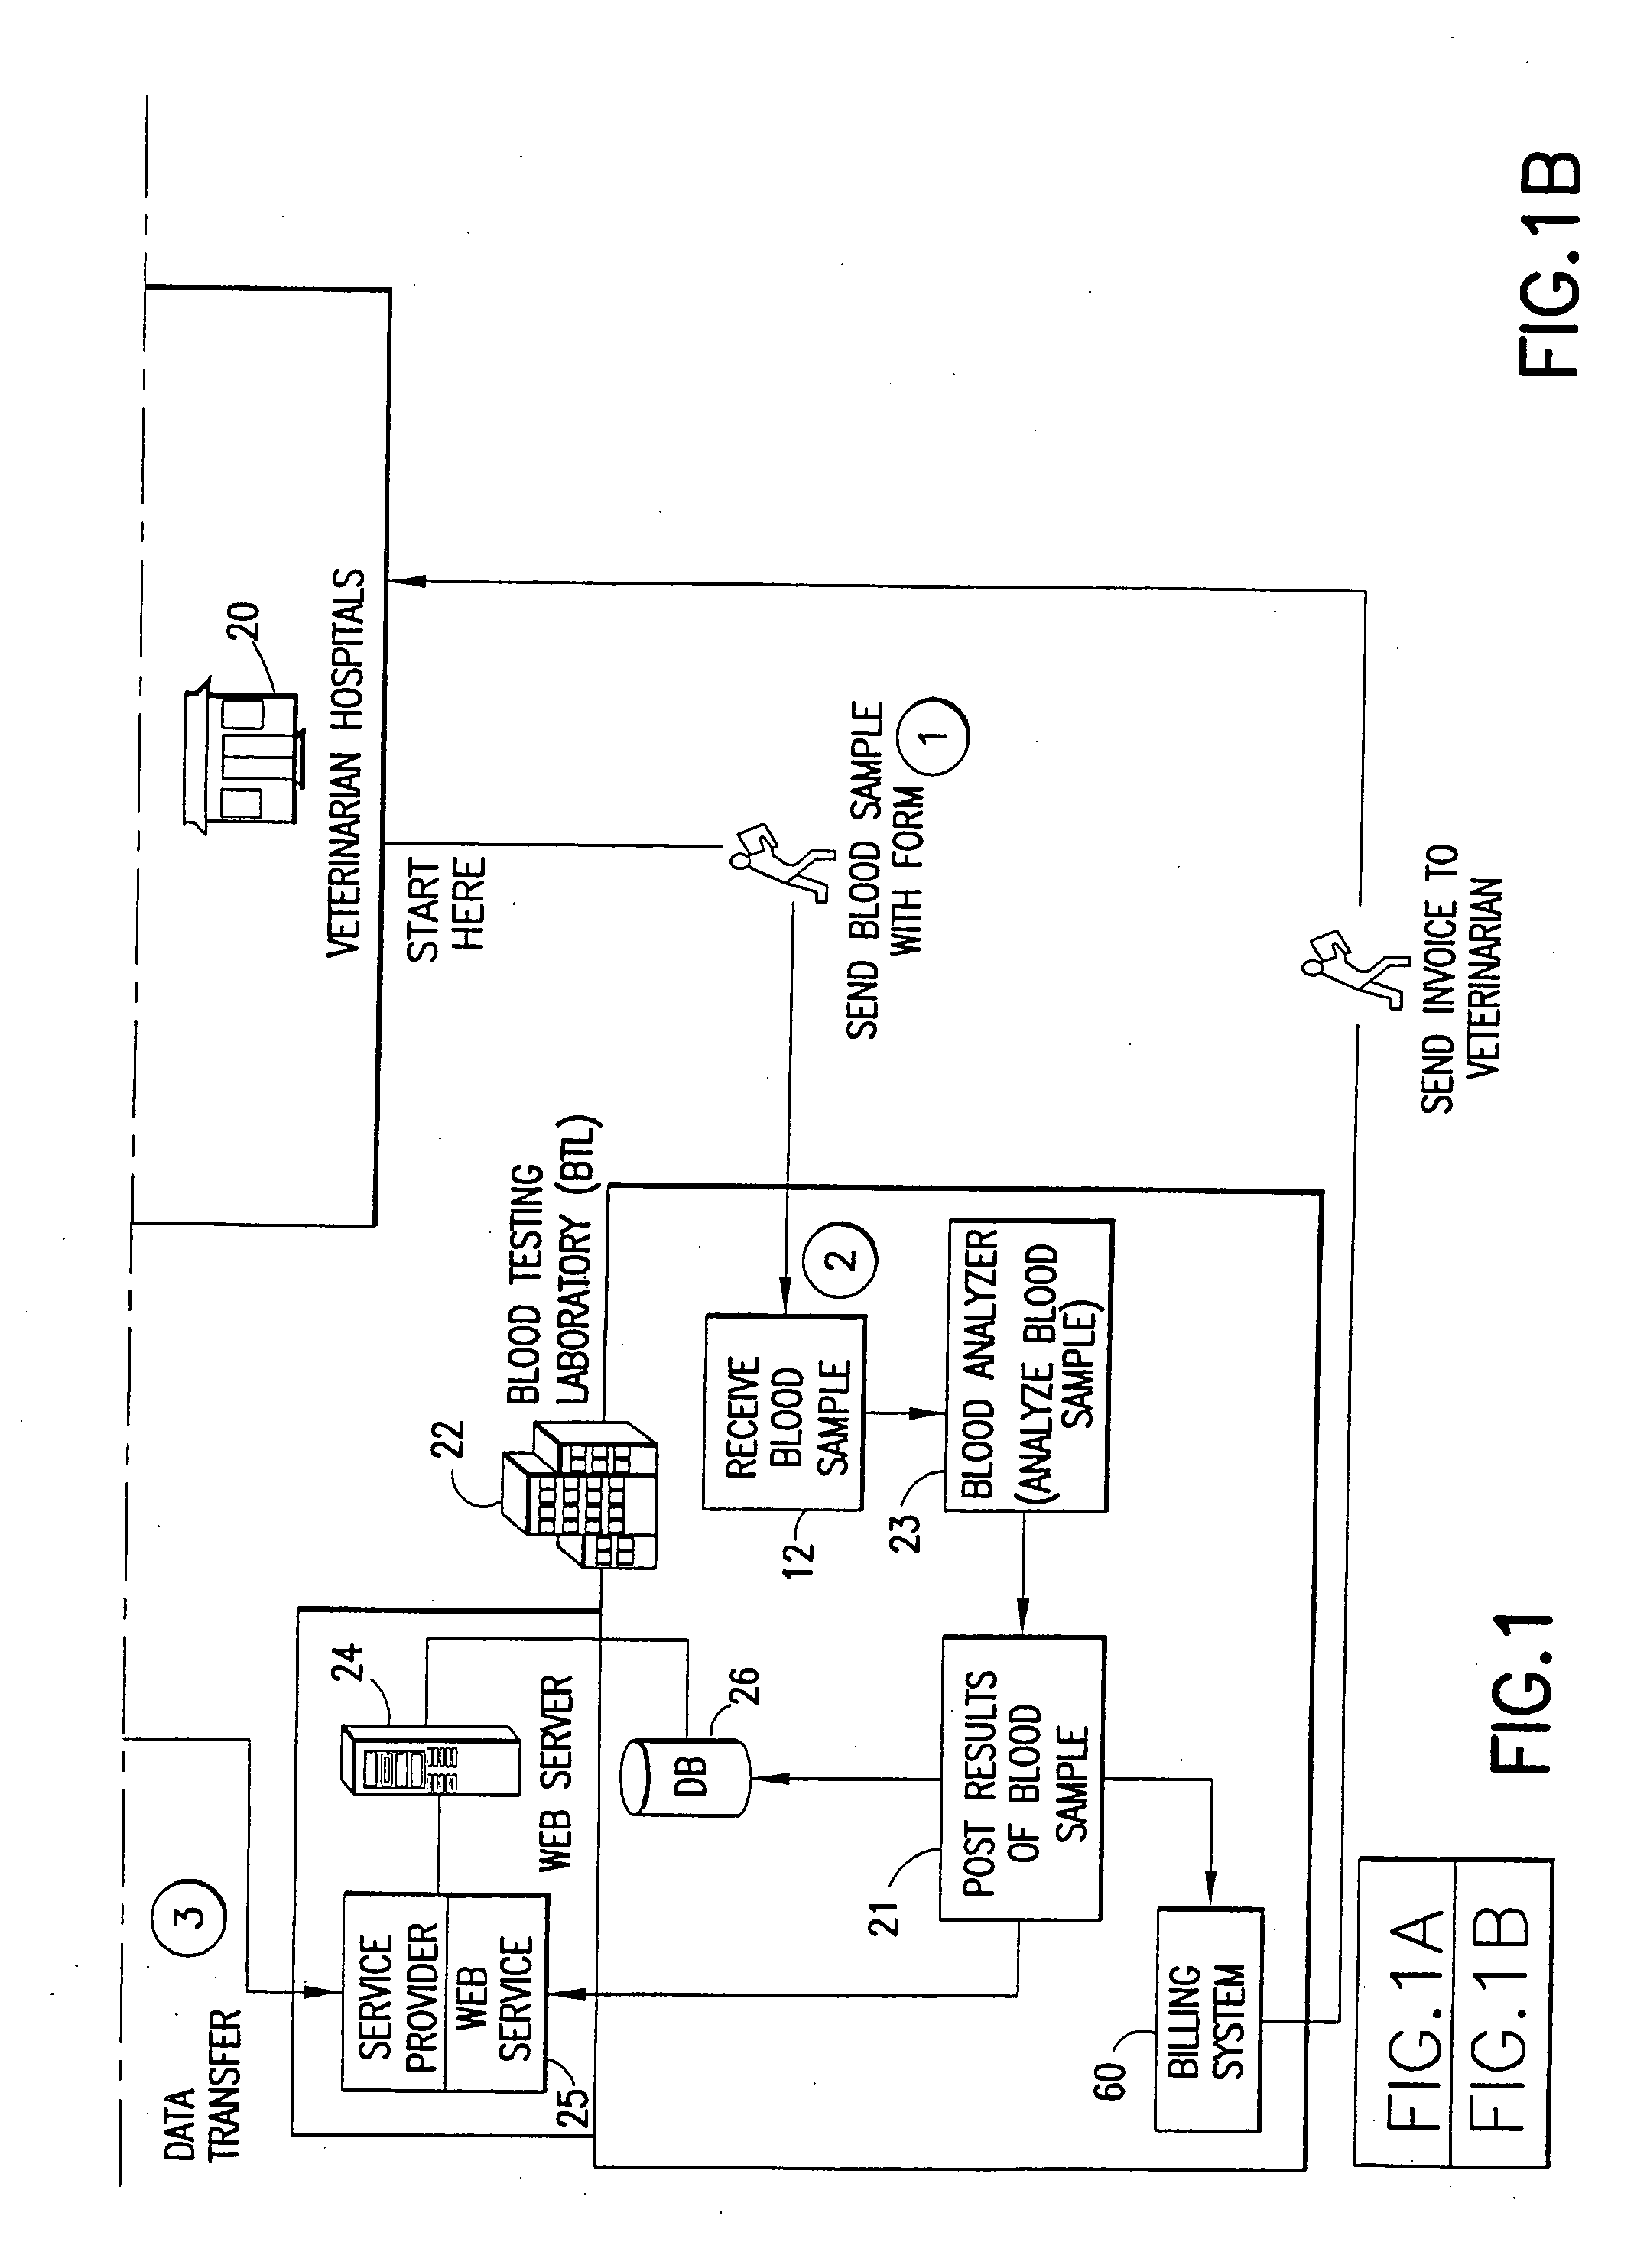 Methods and systems for providing a nutraceutical program specific to an individual animal